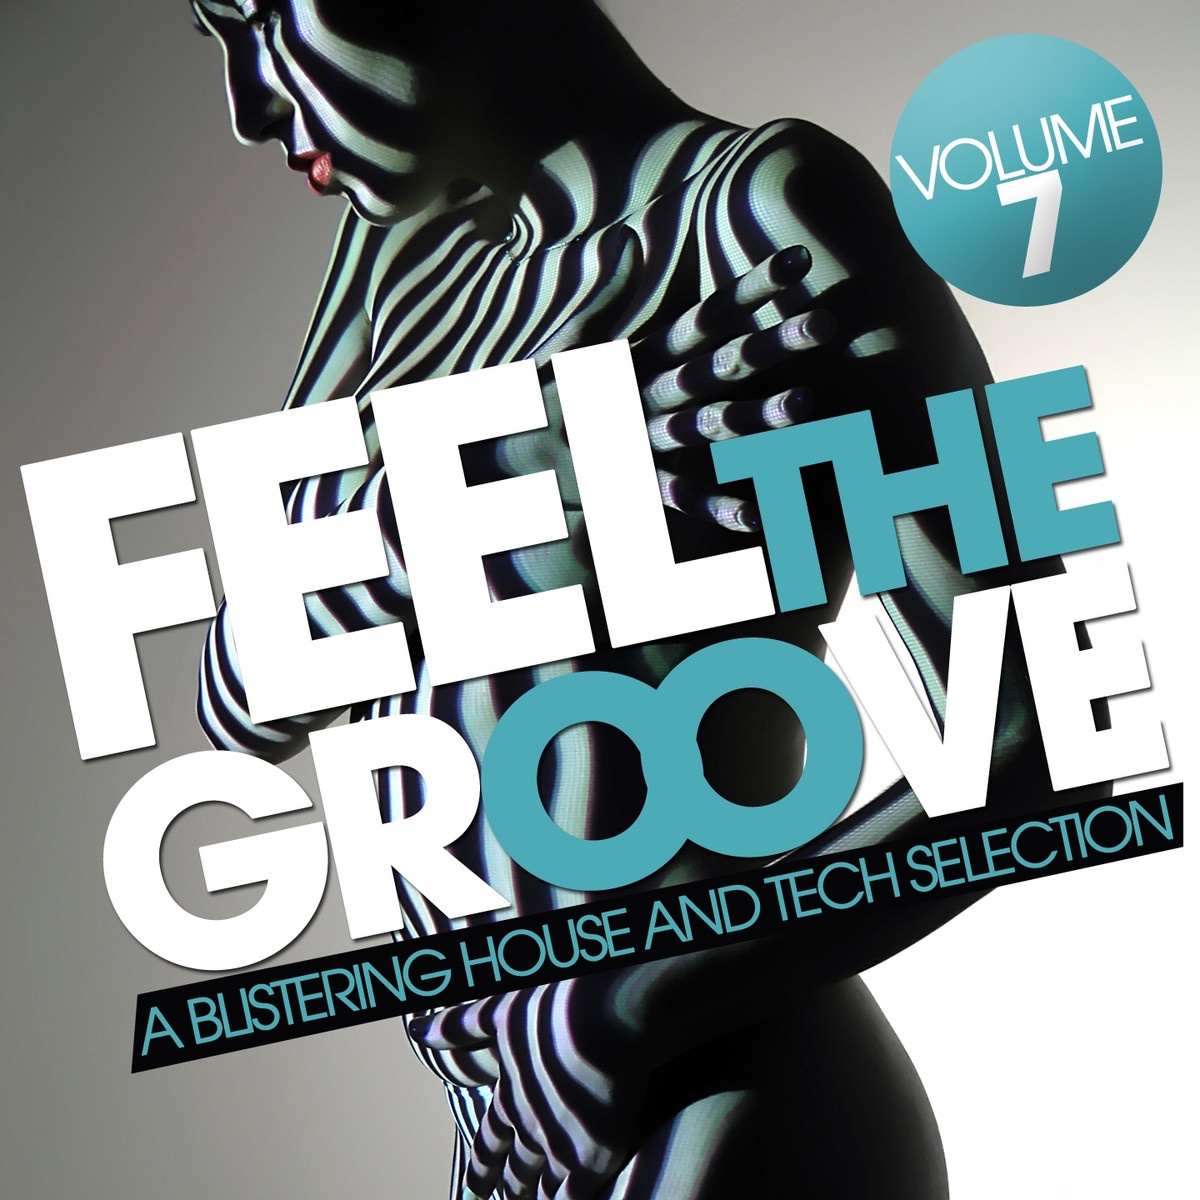 Feel the Groove - A Blistering House and Tech Selection, Vol. 7